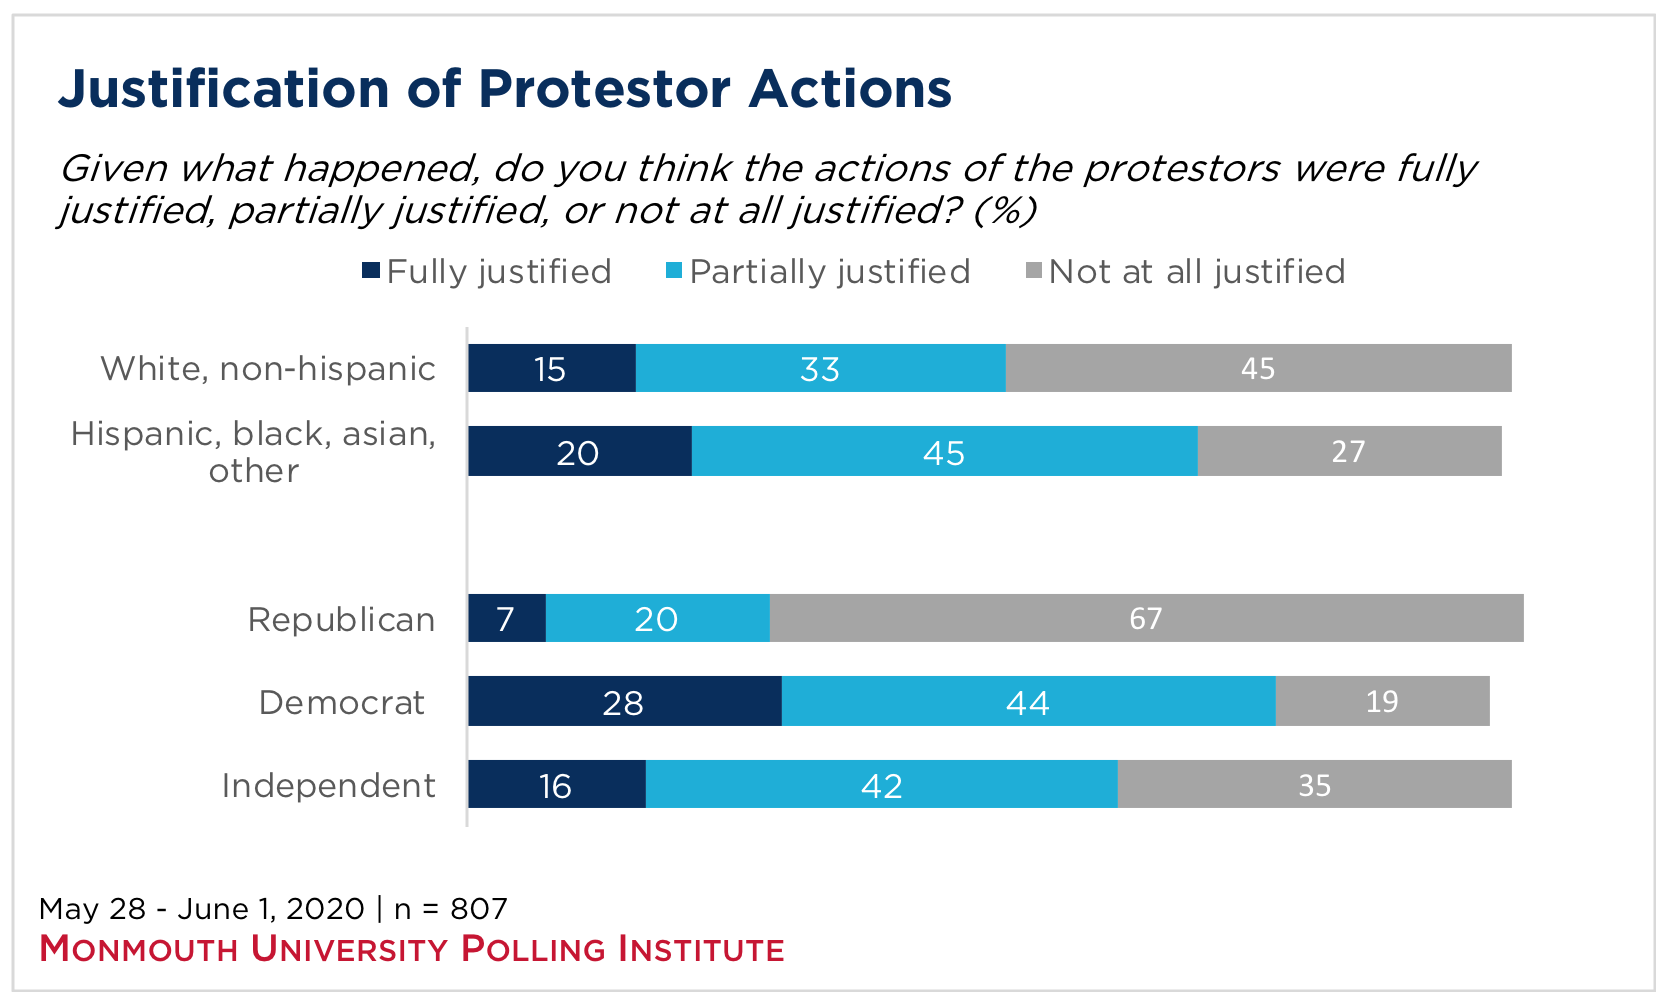 Bar graph showing public opinion on the justification of protestors' actions